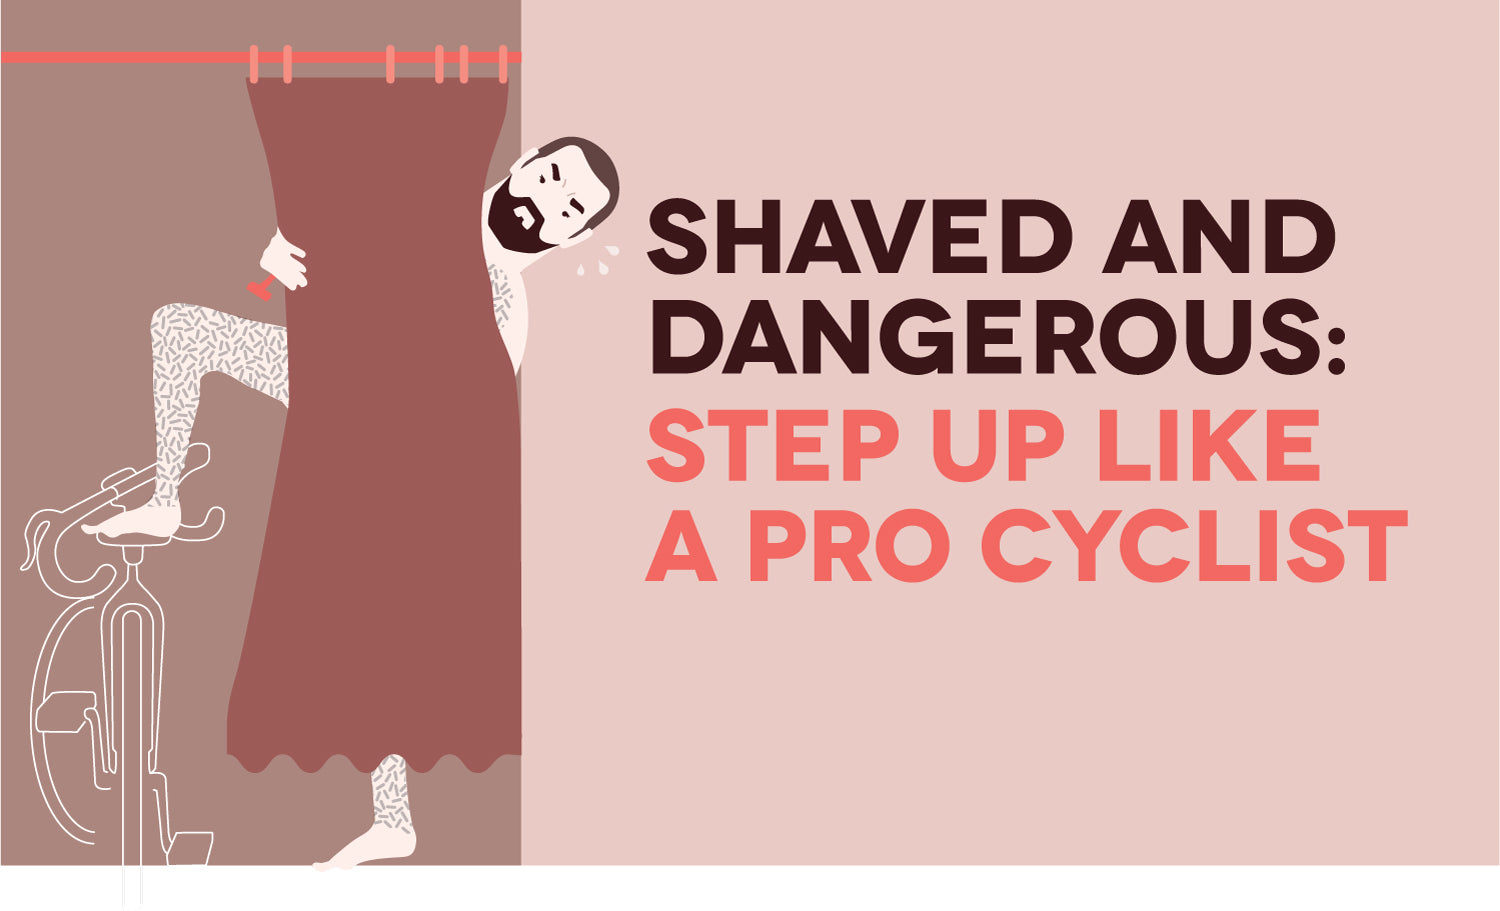 Why do cyclists shave their legs?